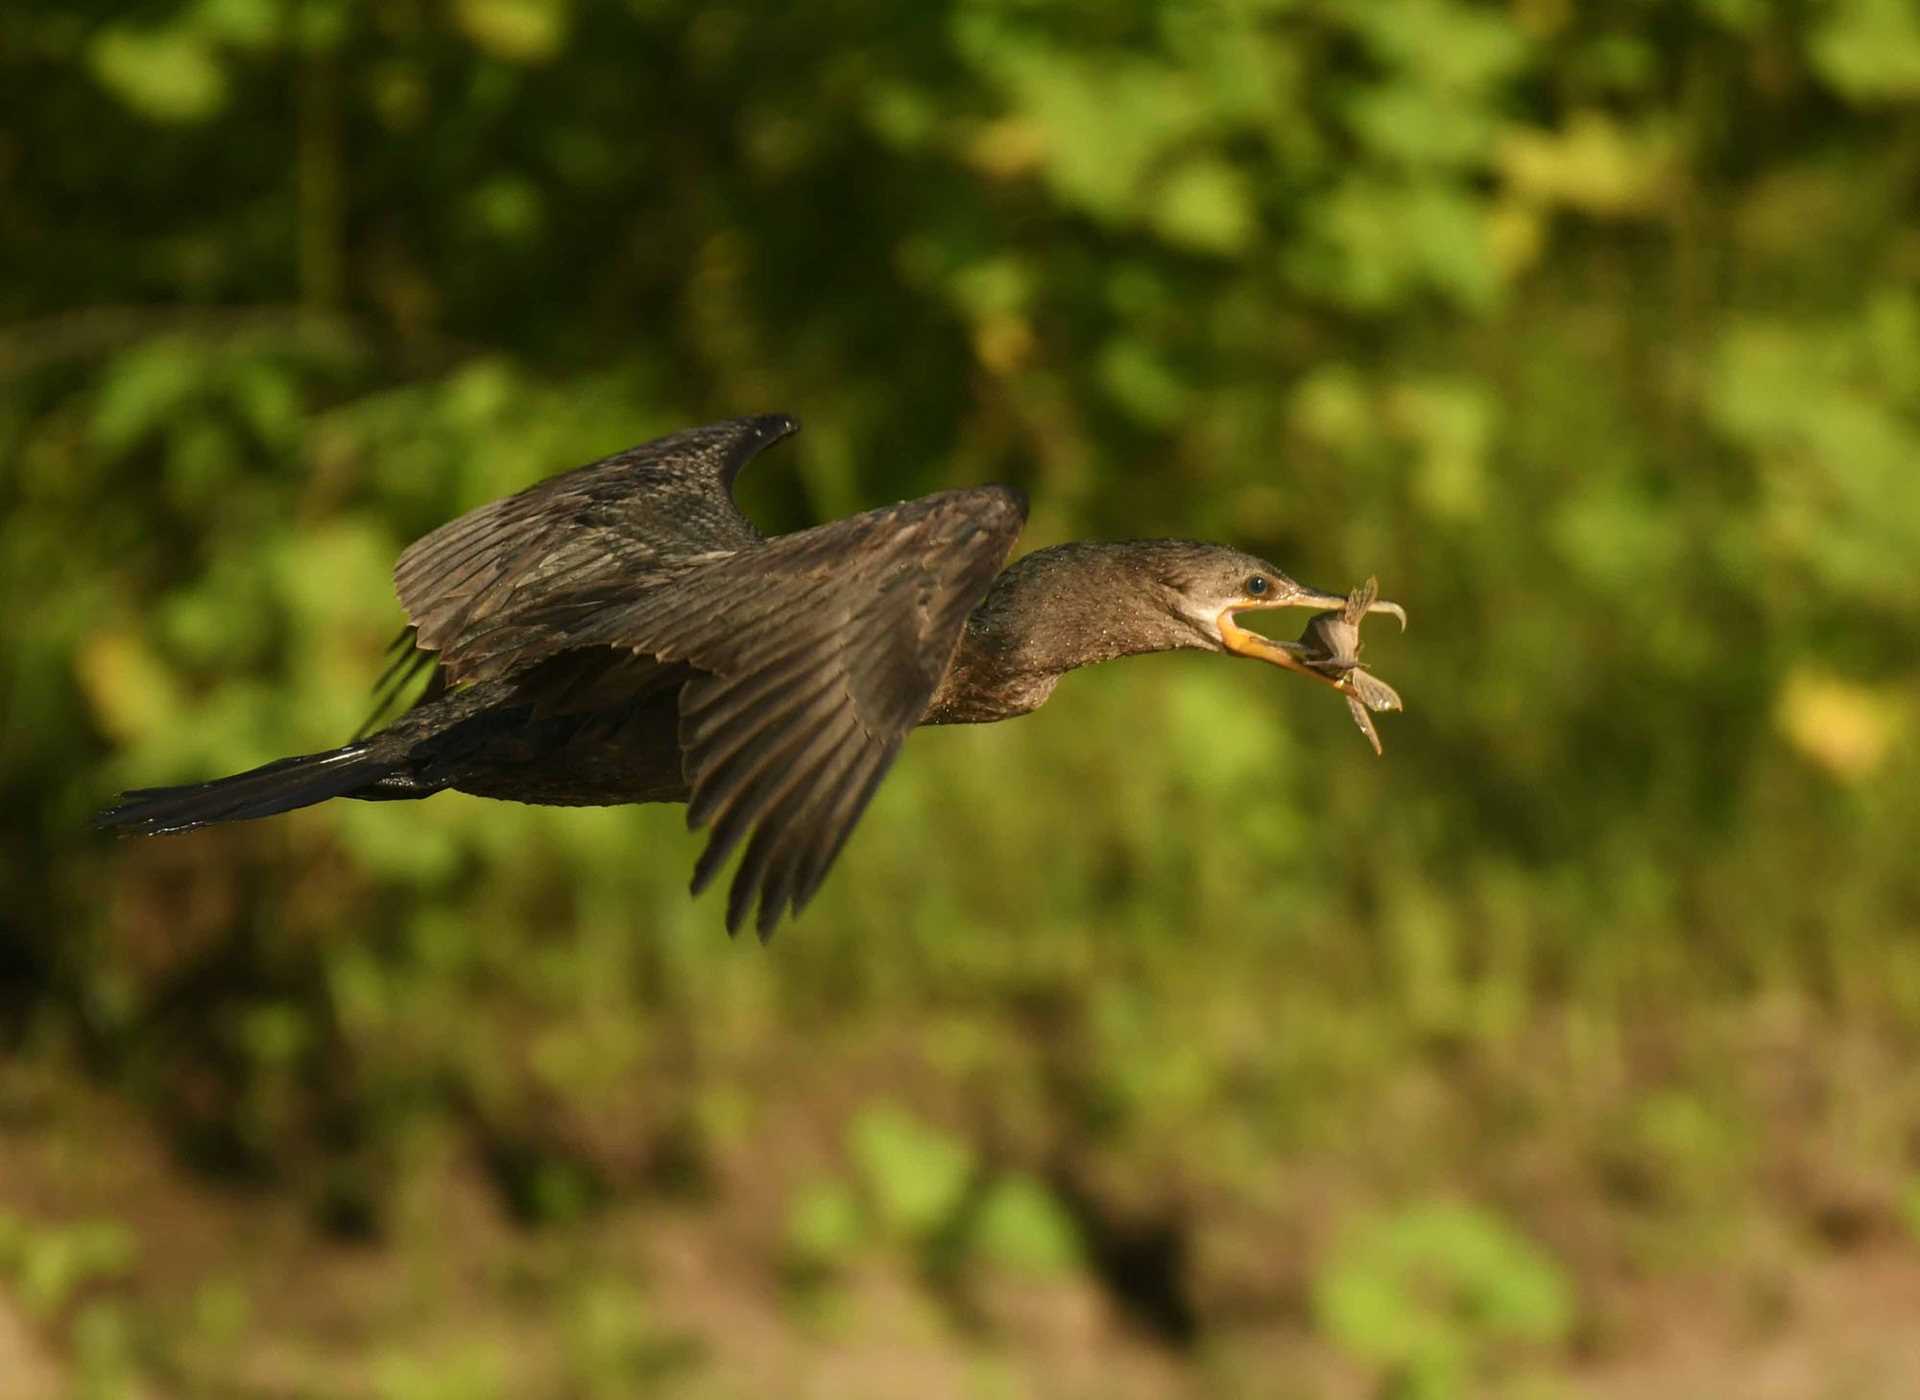 cormorant in flight with fish in its mouth